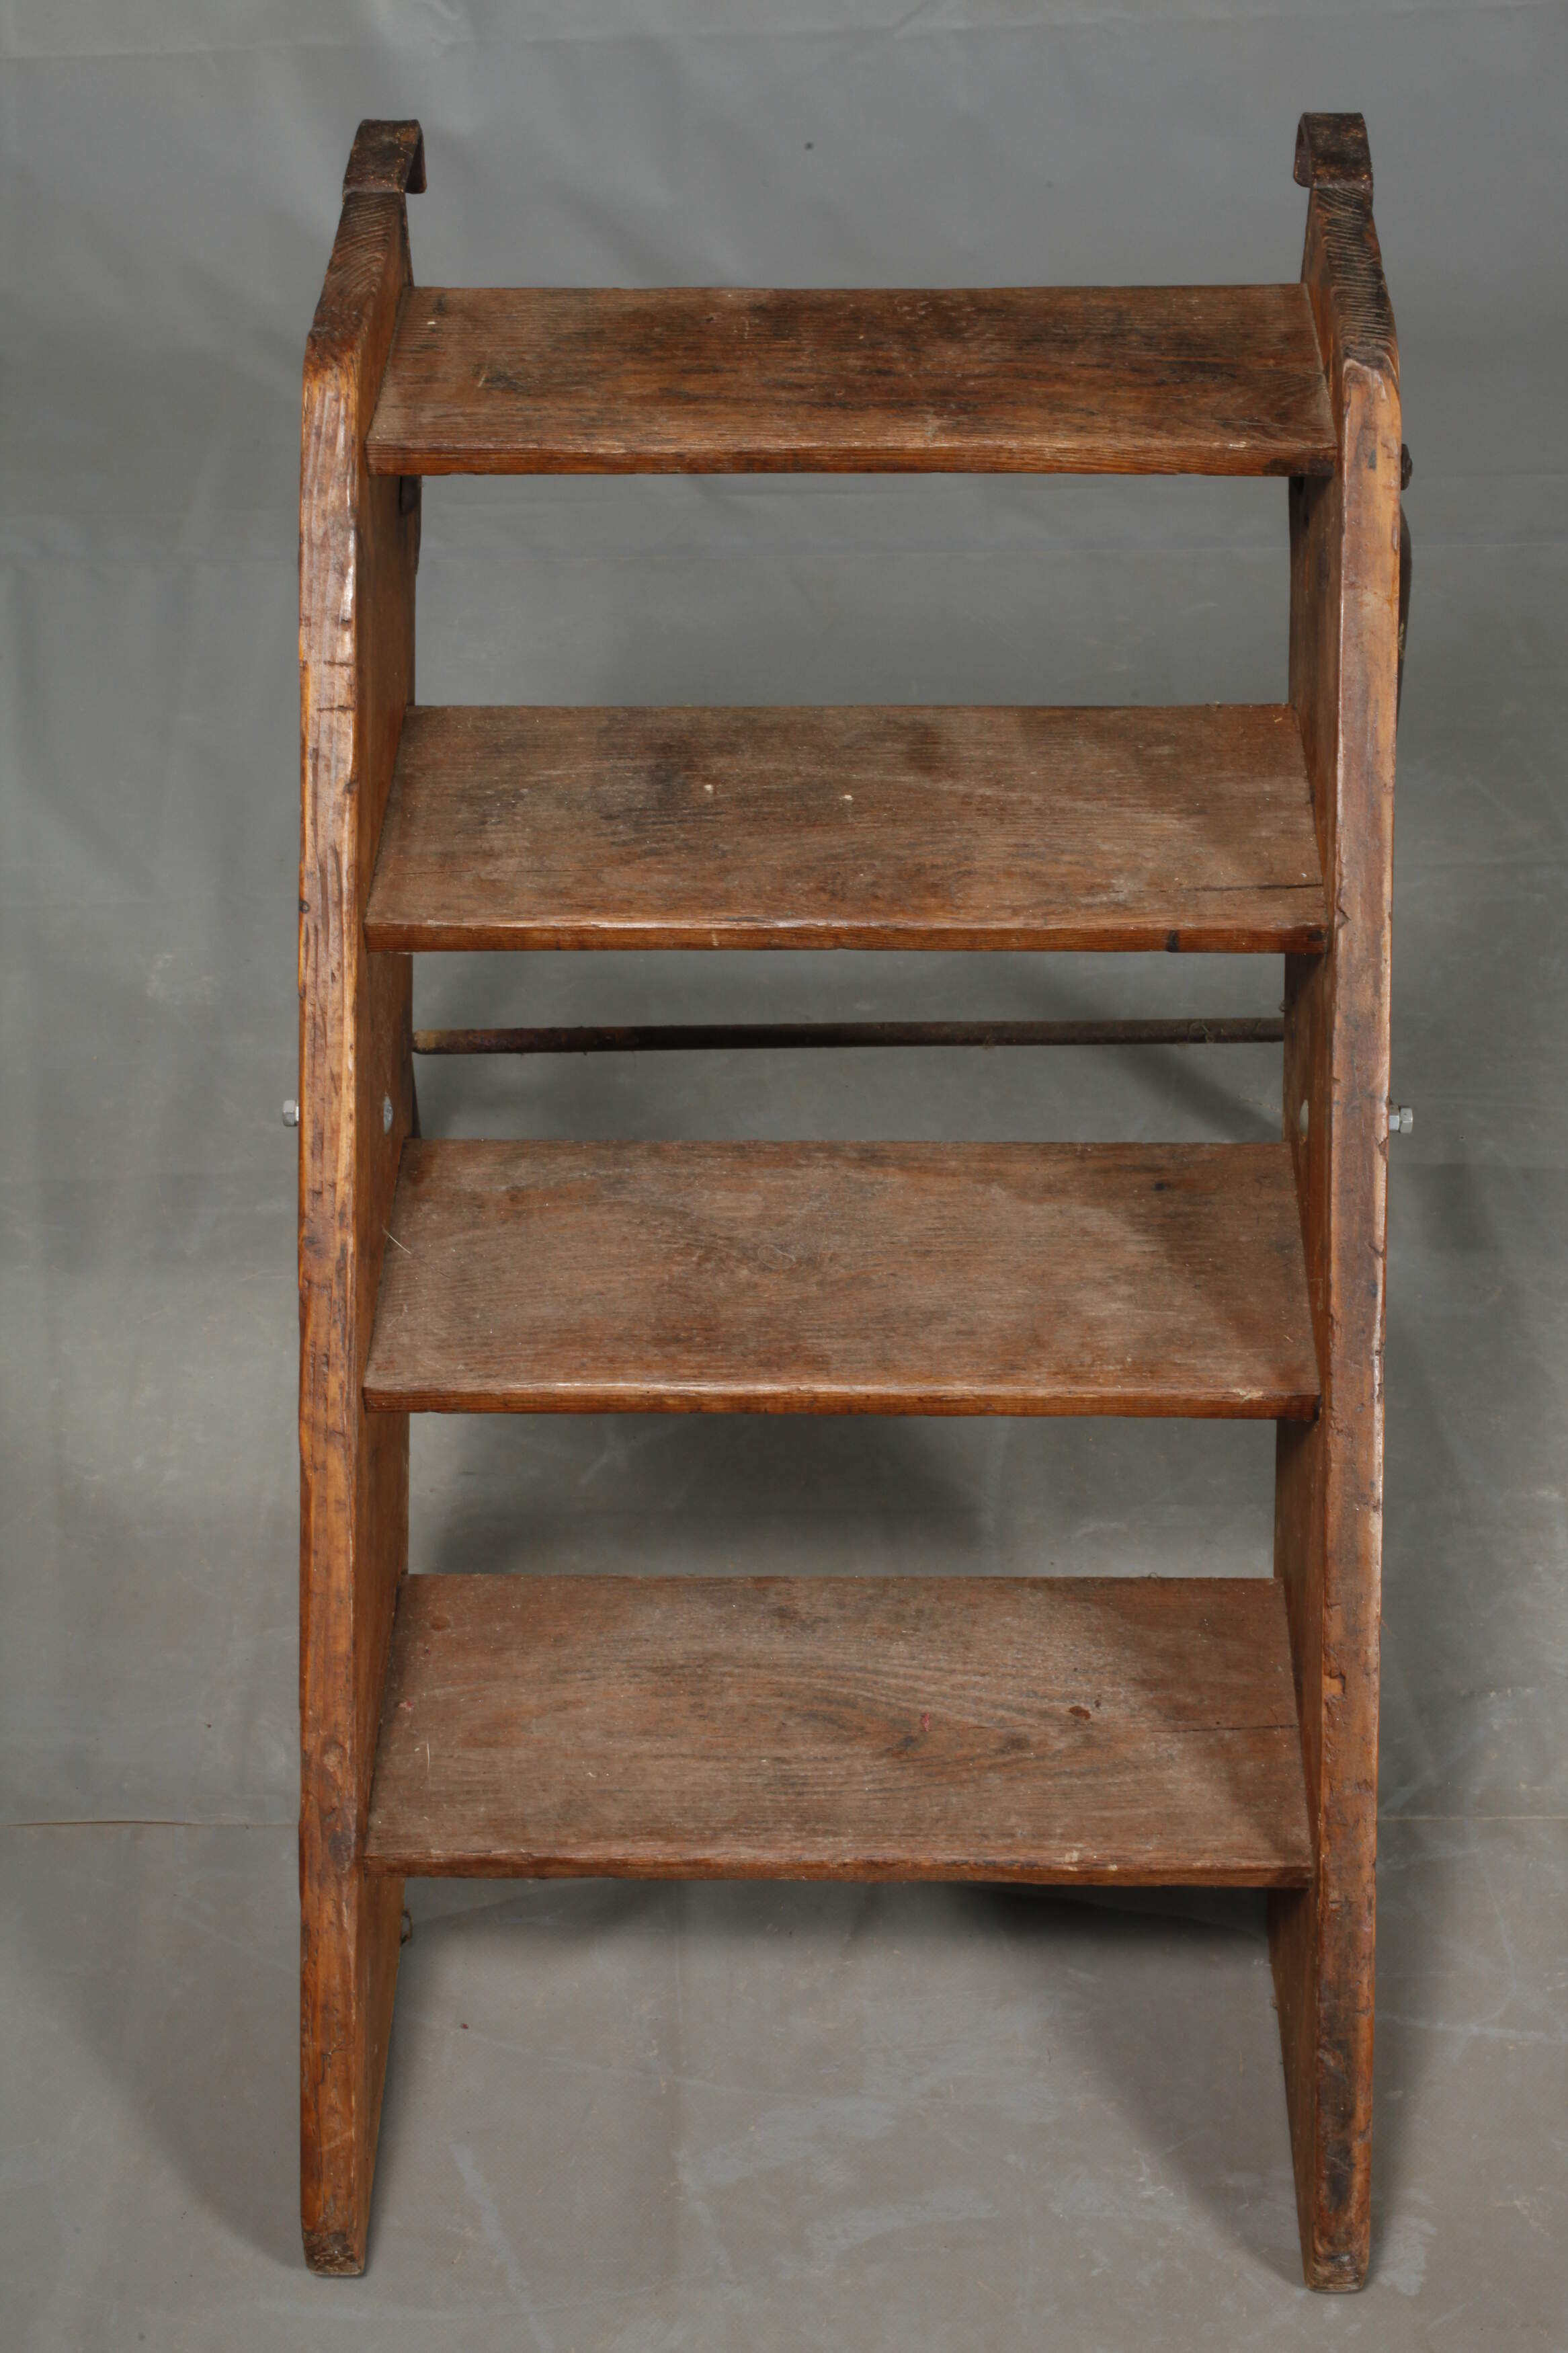 Small stepladder - Image 2 of 3